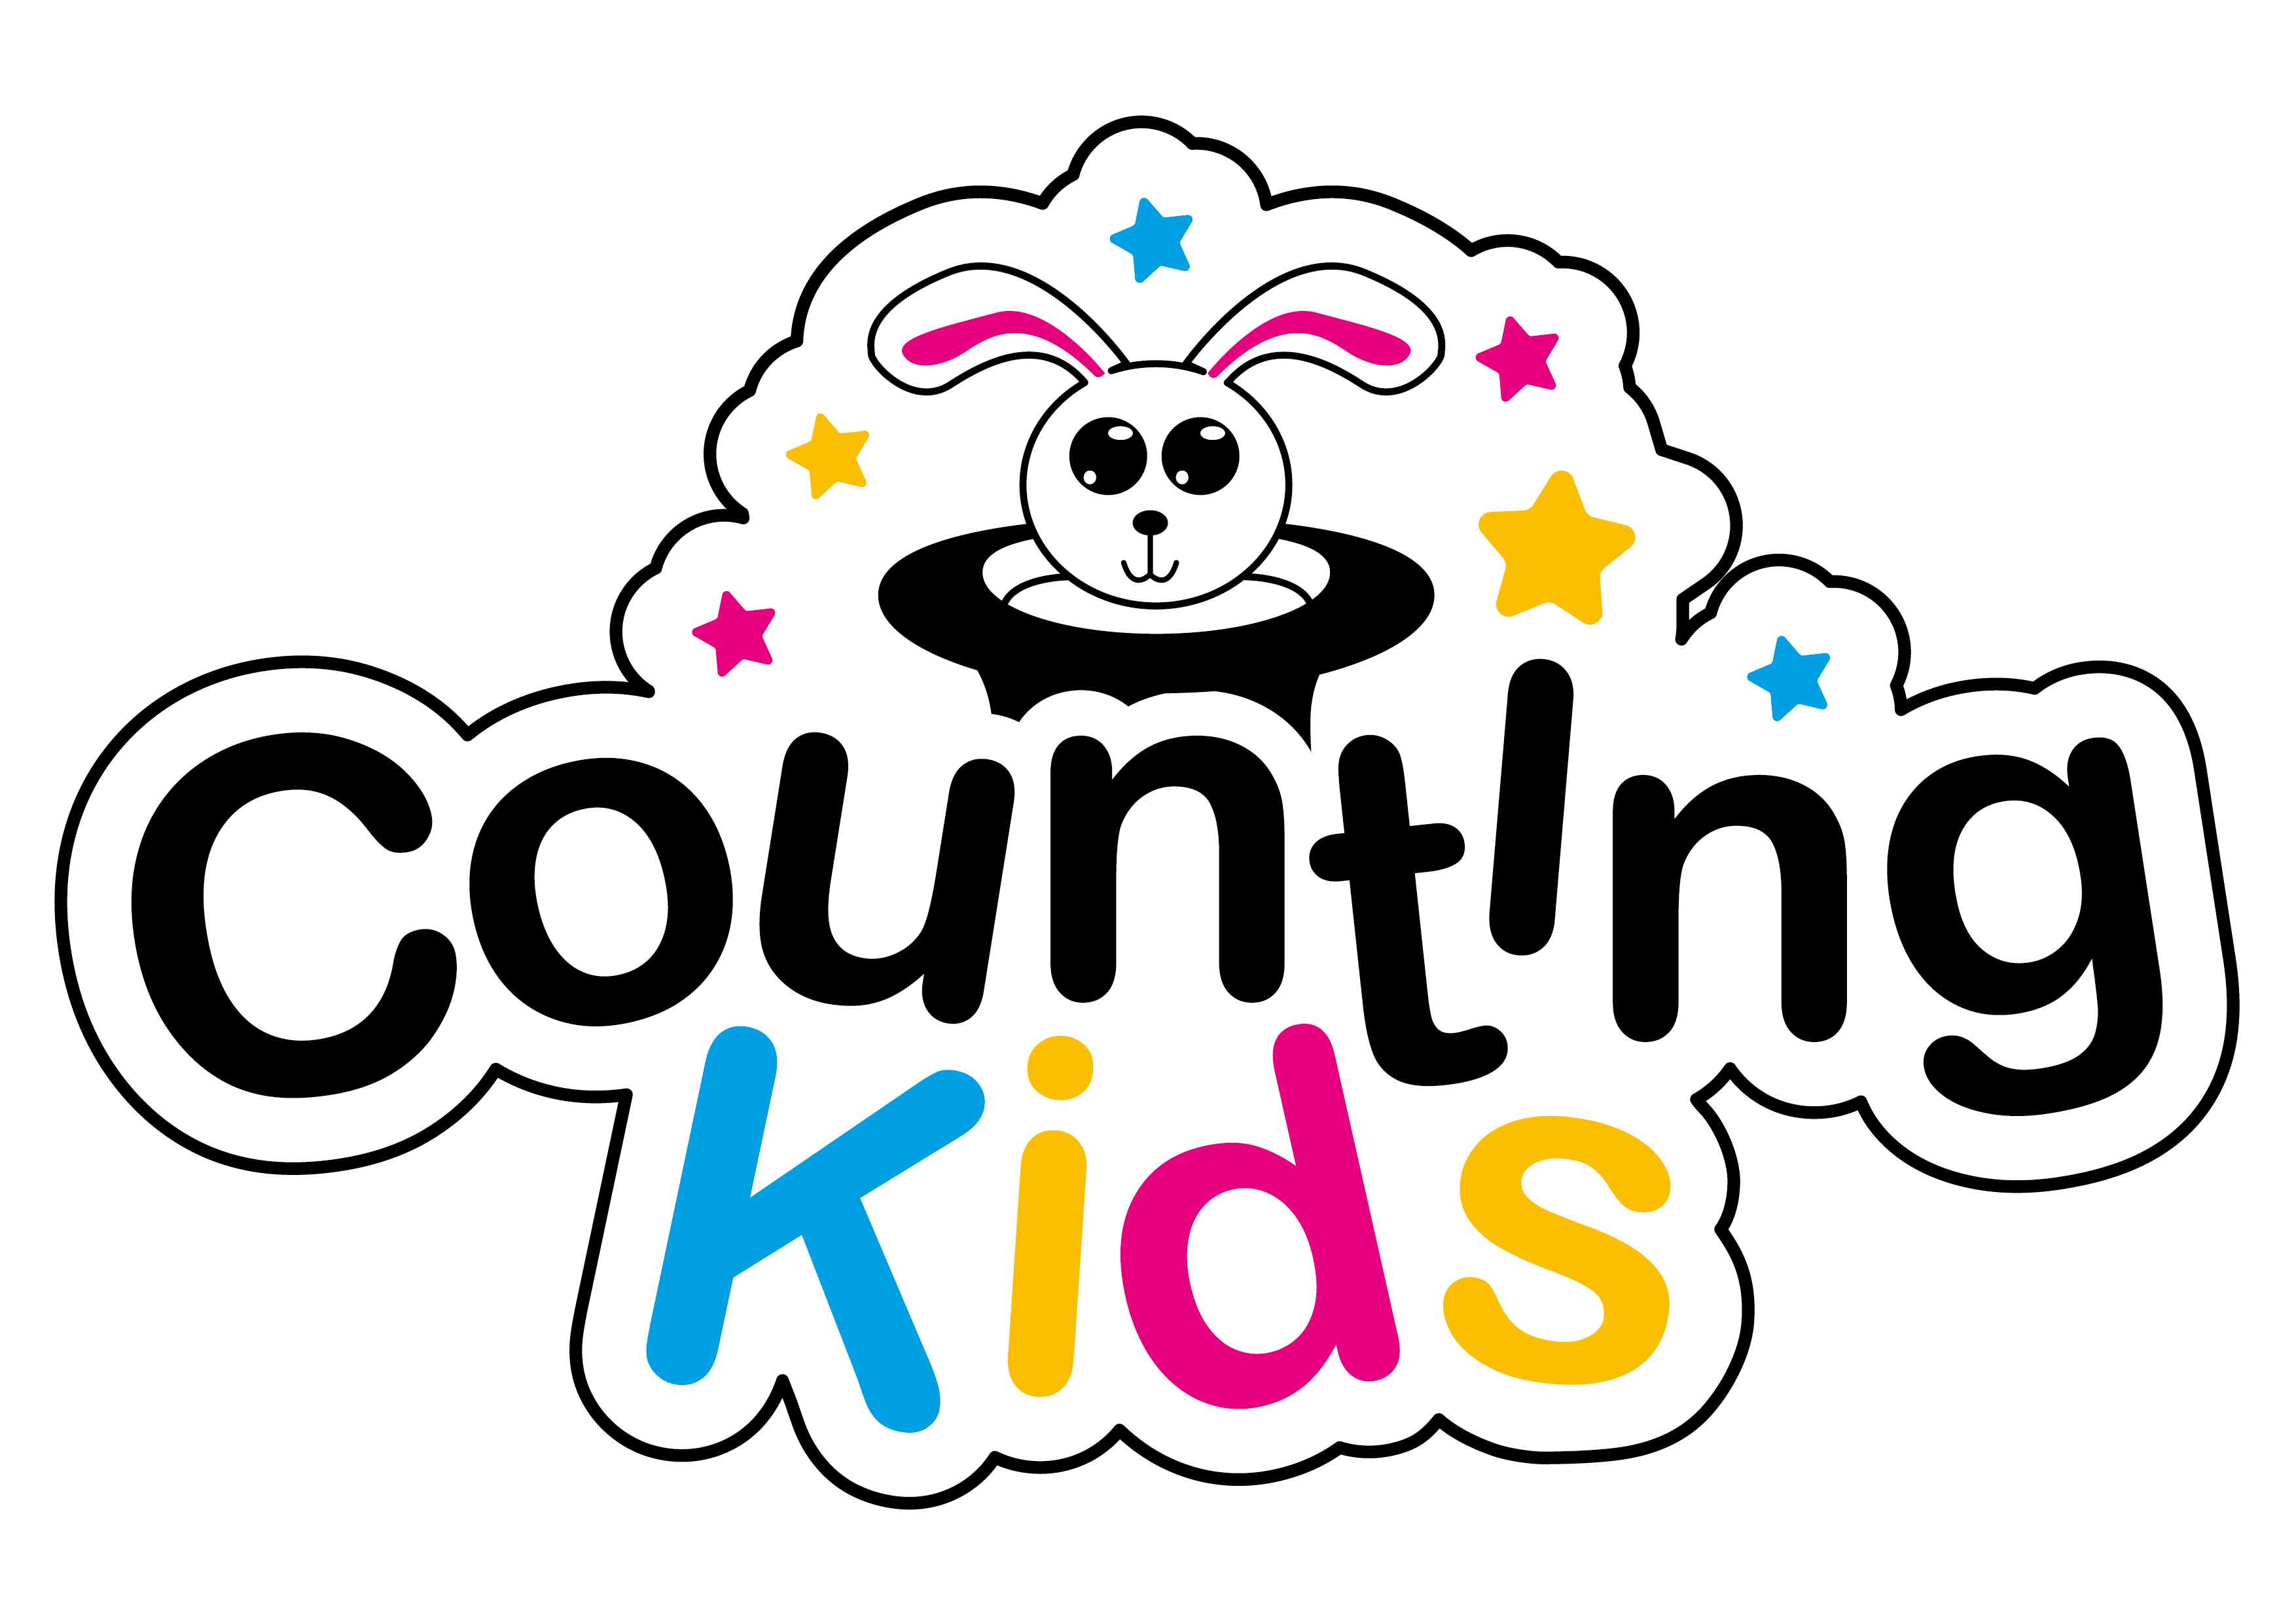 Counting Kids 's logo